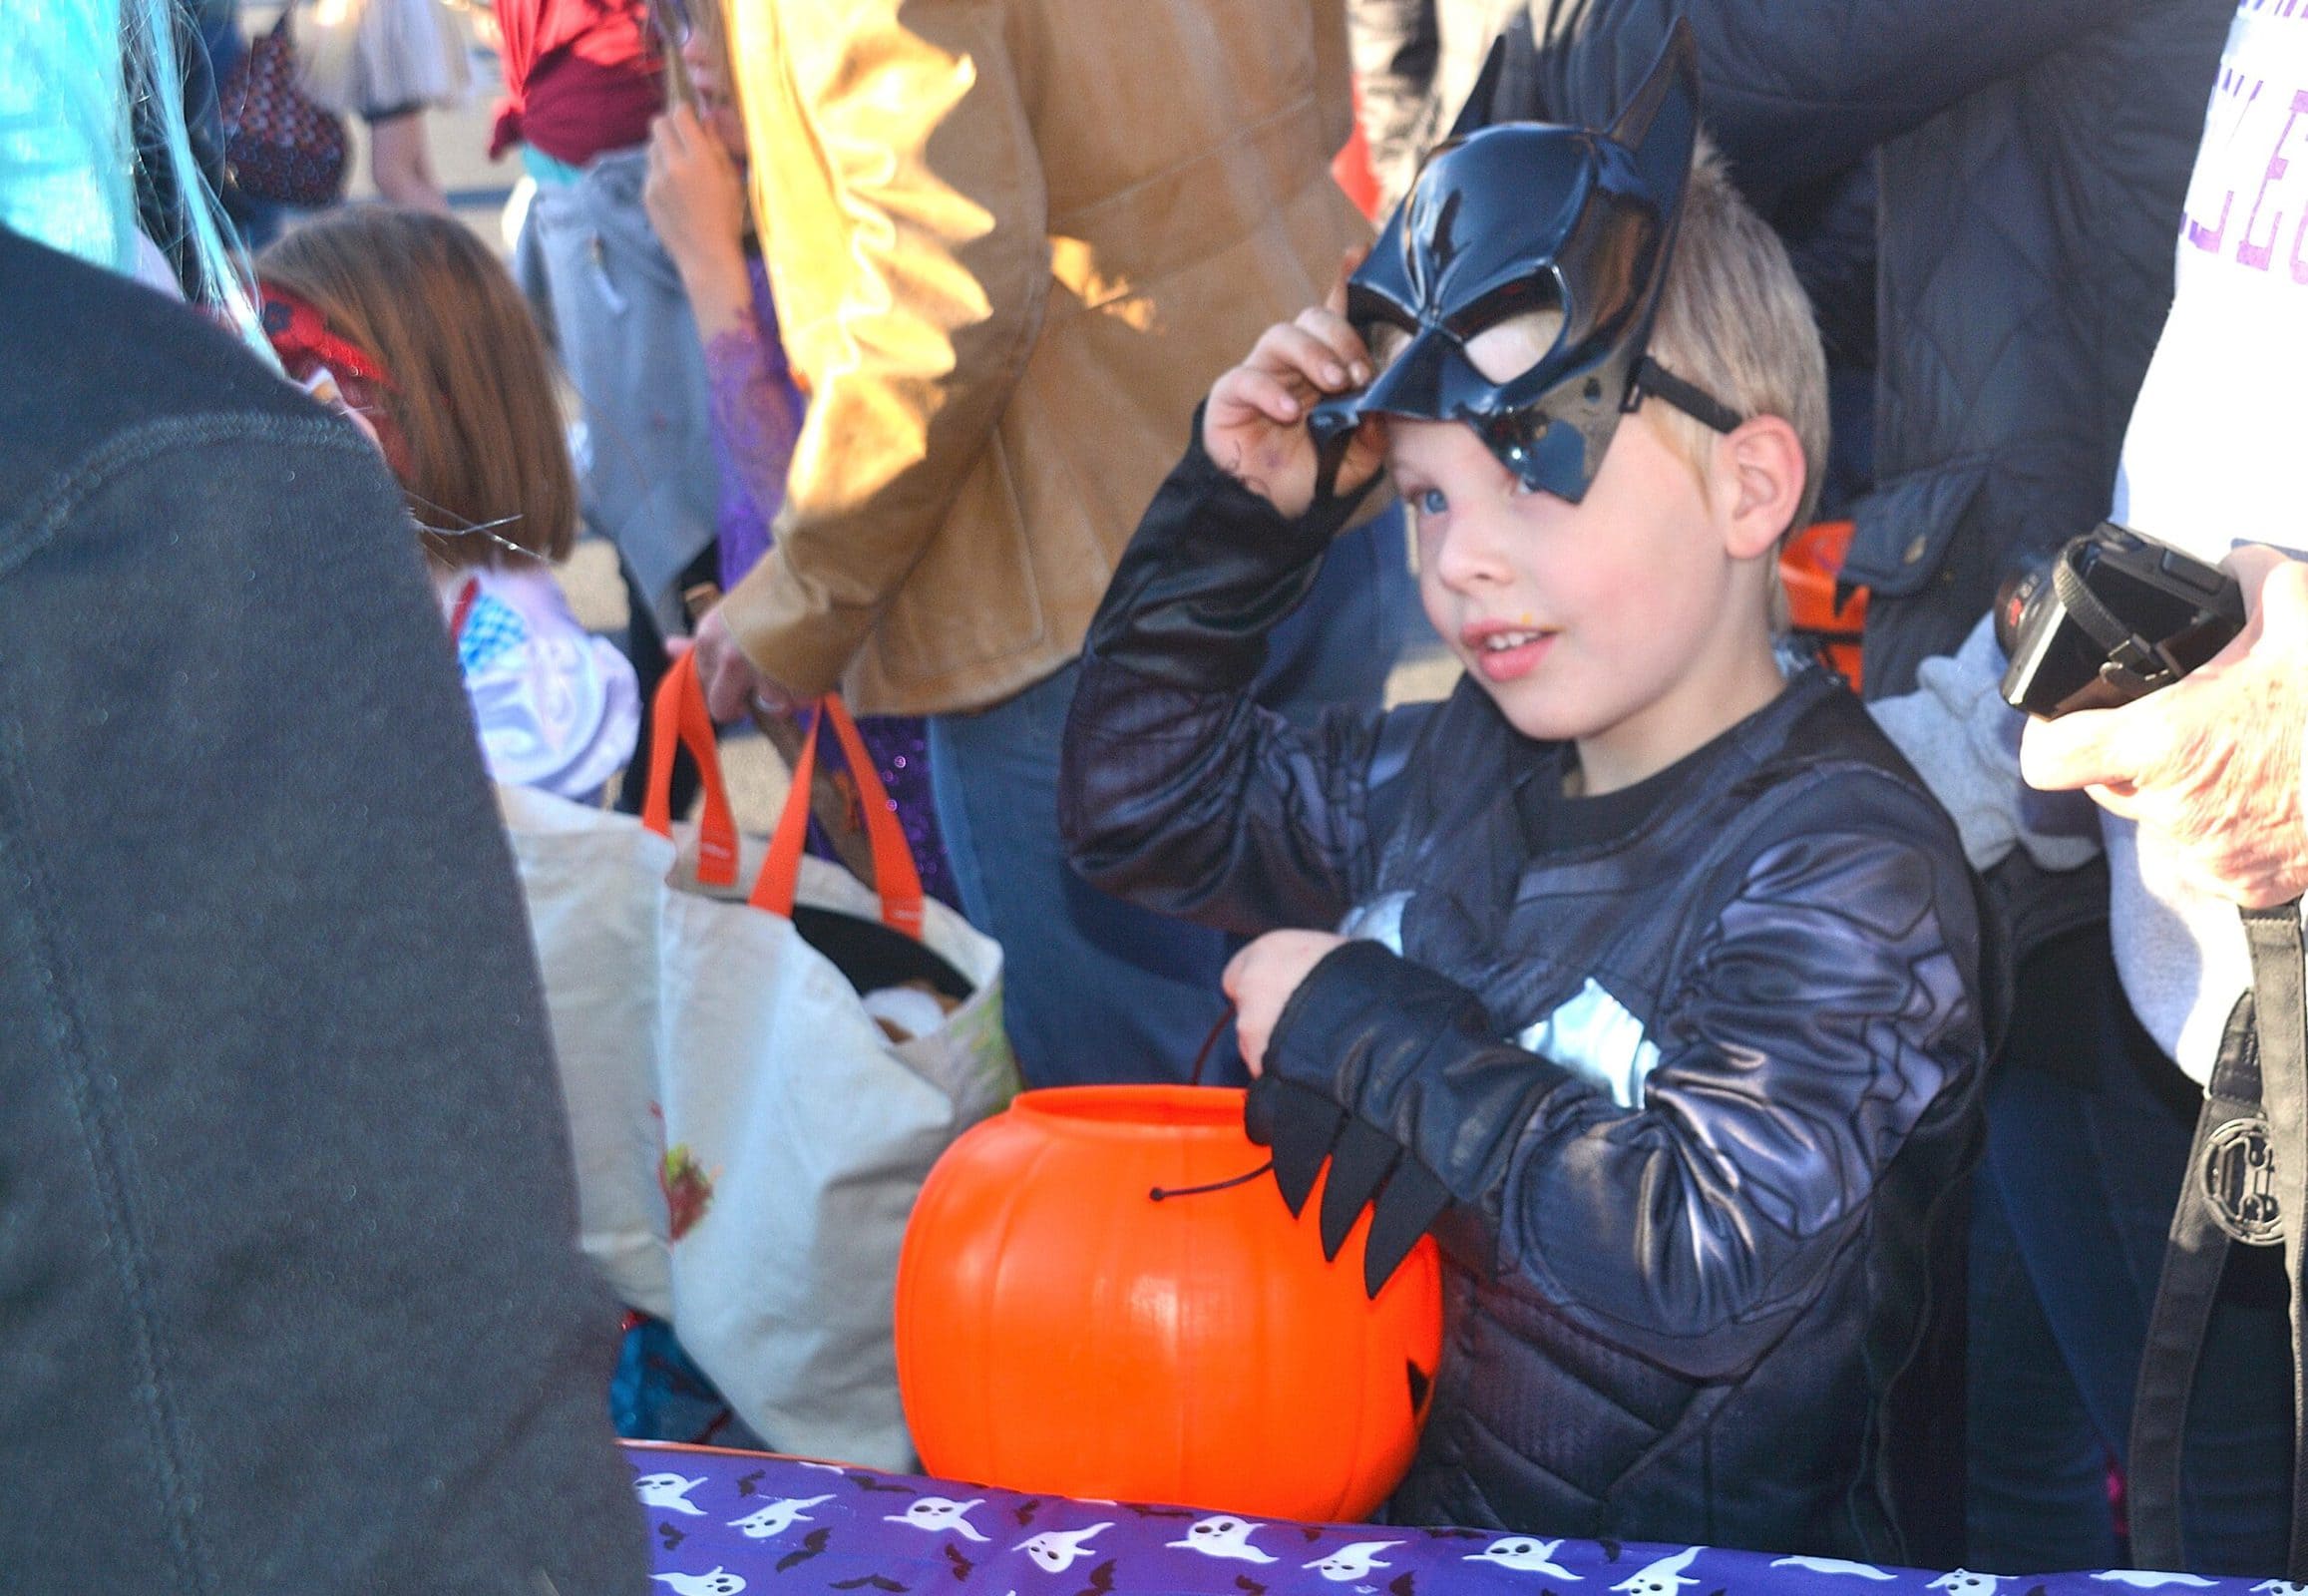 Cameron Wood, 5, costumed as Batman, thanks members of Friends of Southborough Recreation for treats at the Trunk or Treat.